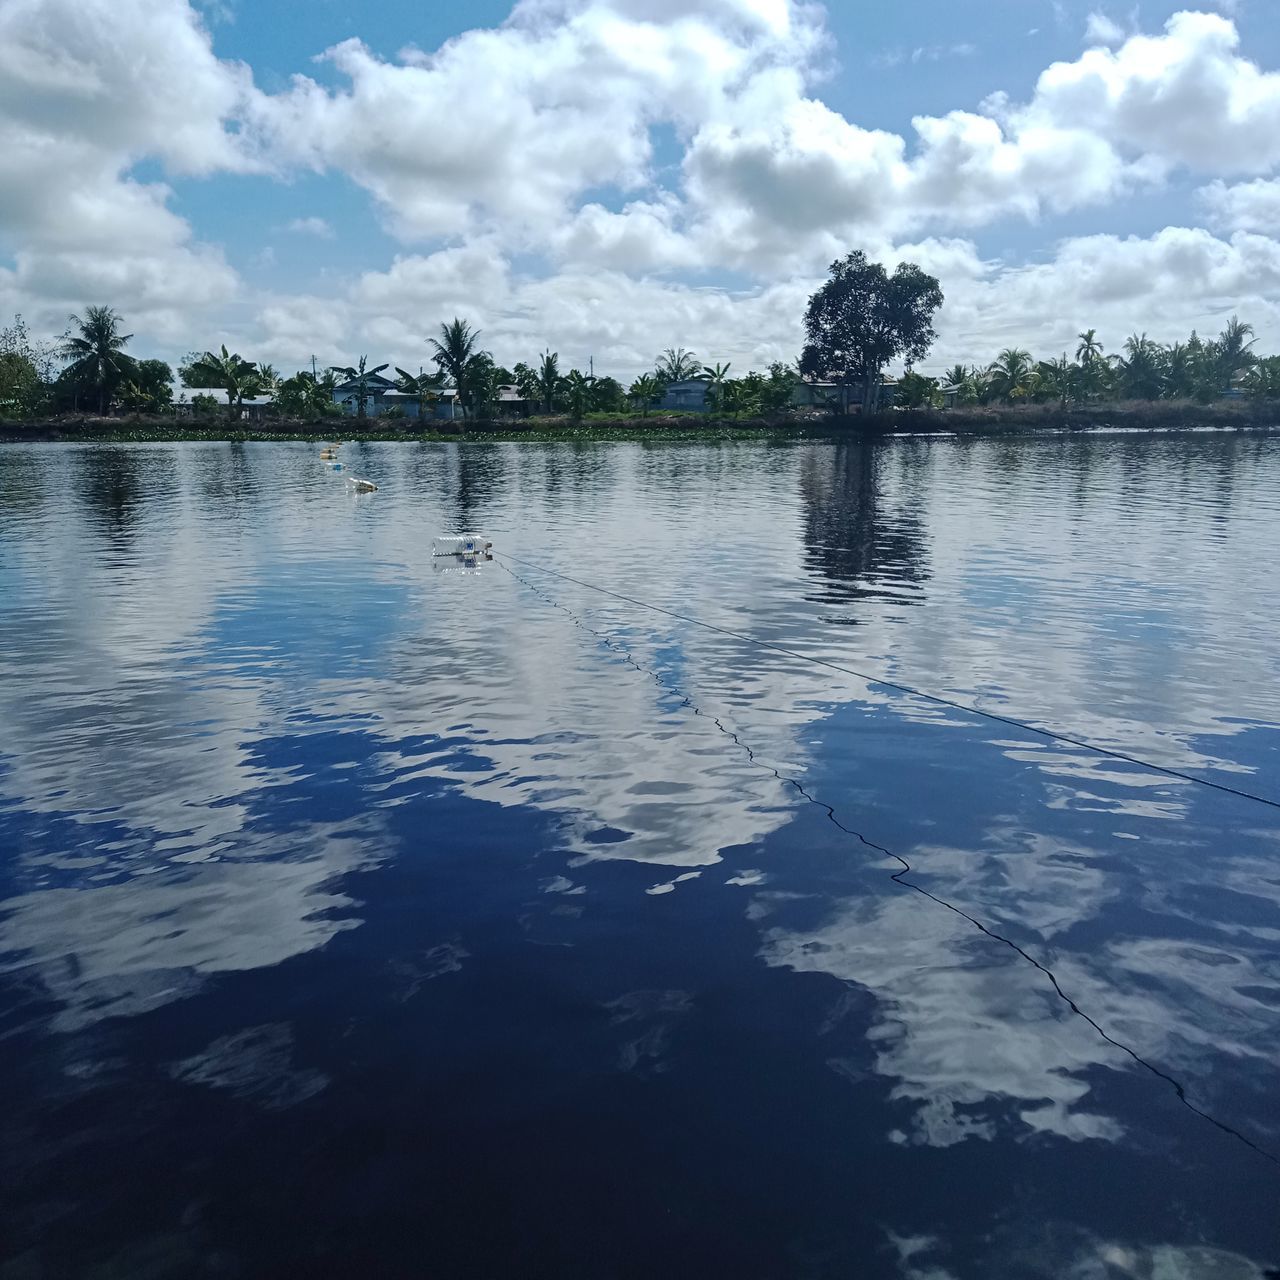 water, reflection, cloud, sky, tree, nature, tranquility, lake, beauty in nature, plant, scenics - nature, tranquil scene, no people, day, environment, blue, outdoors, shore, body of water, landscape, travel destinations, rippled, reservoir, idyllic, travel, land, non-urban scene, horizon